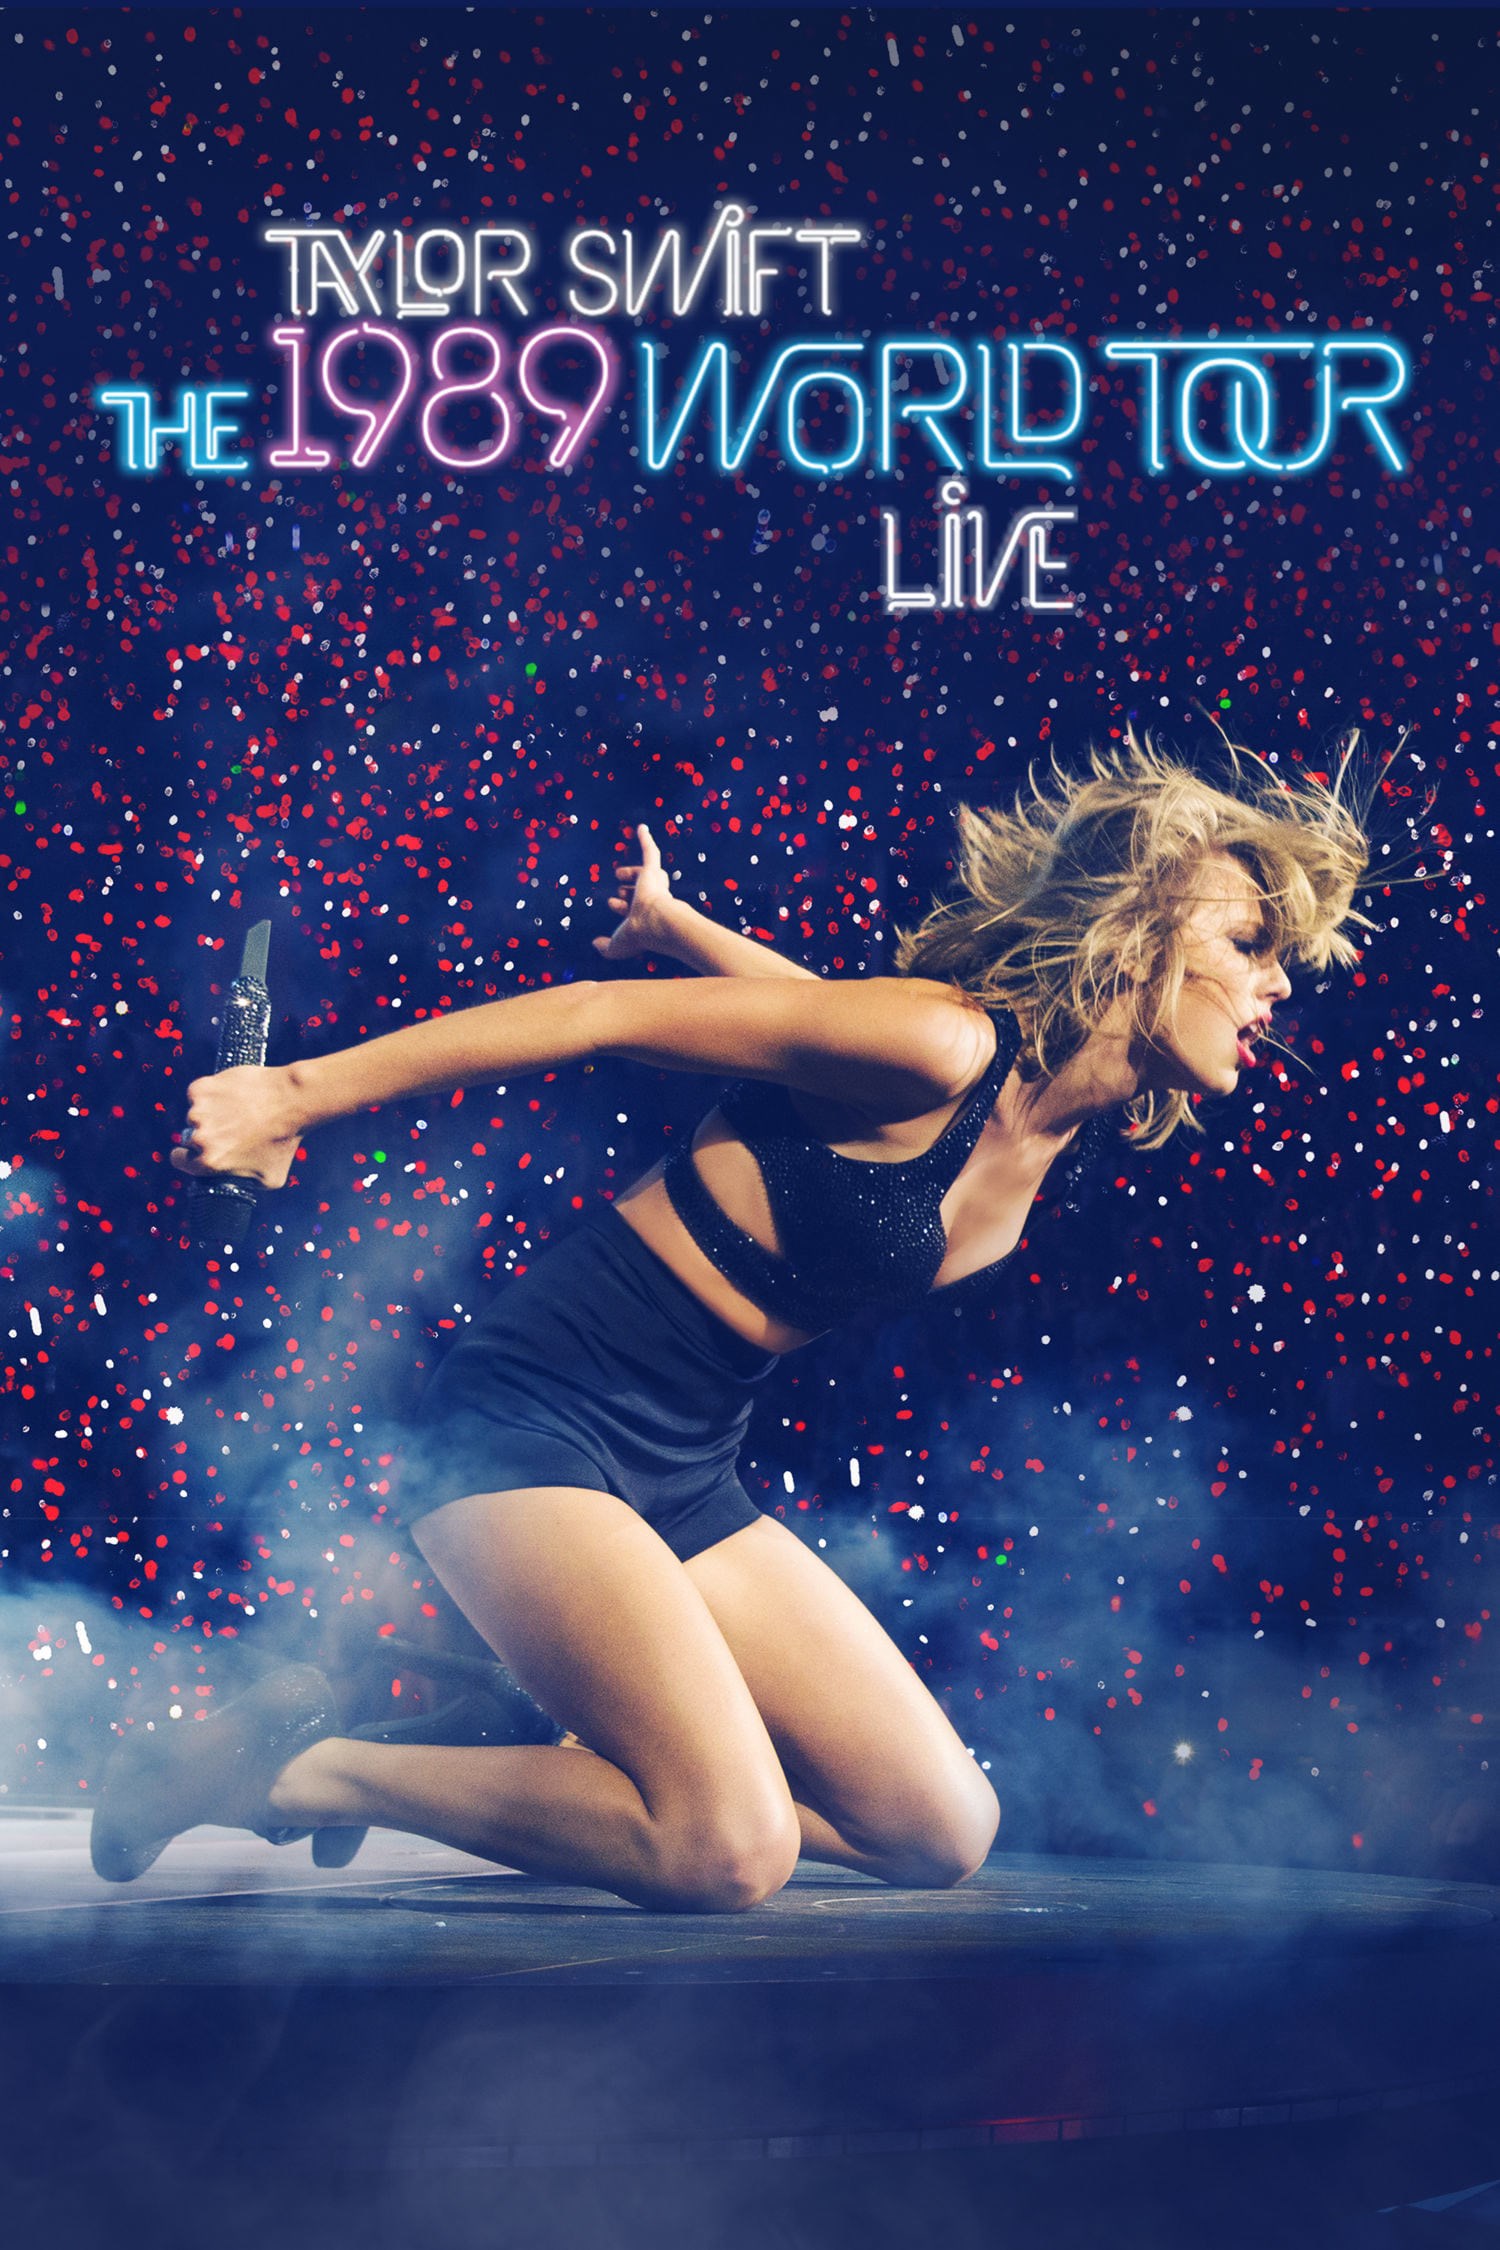 taylor swift tour nytimes